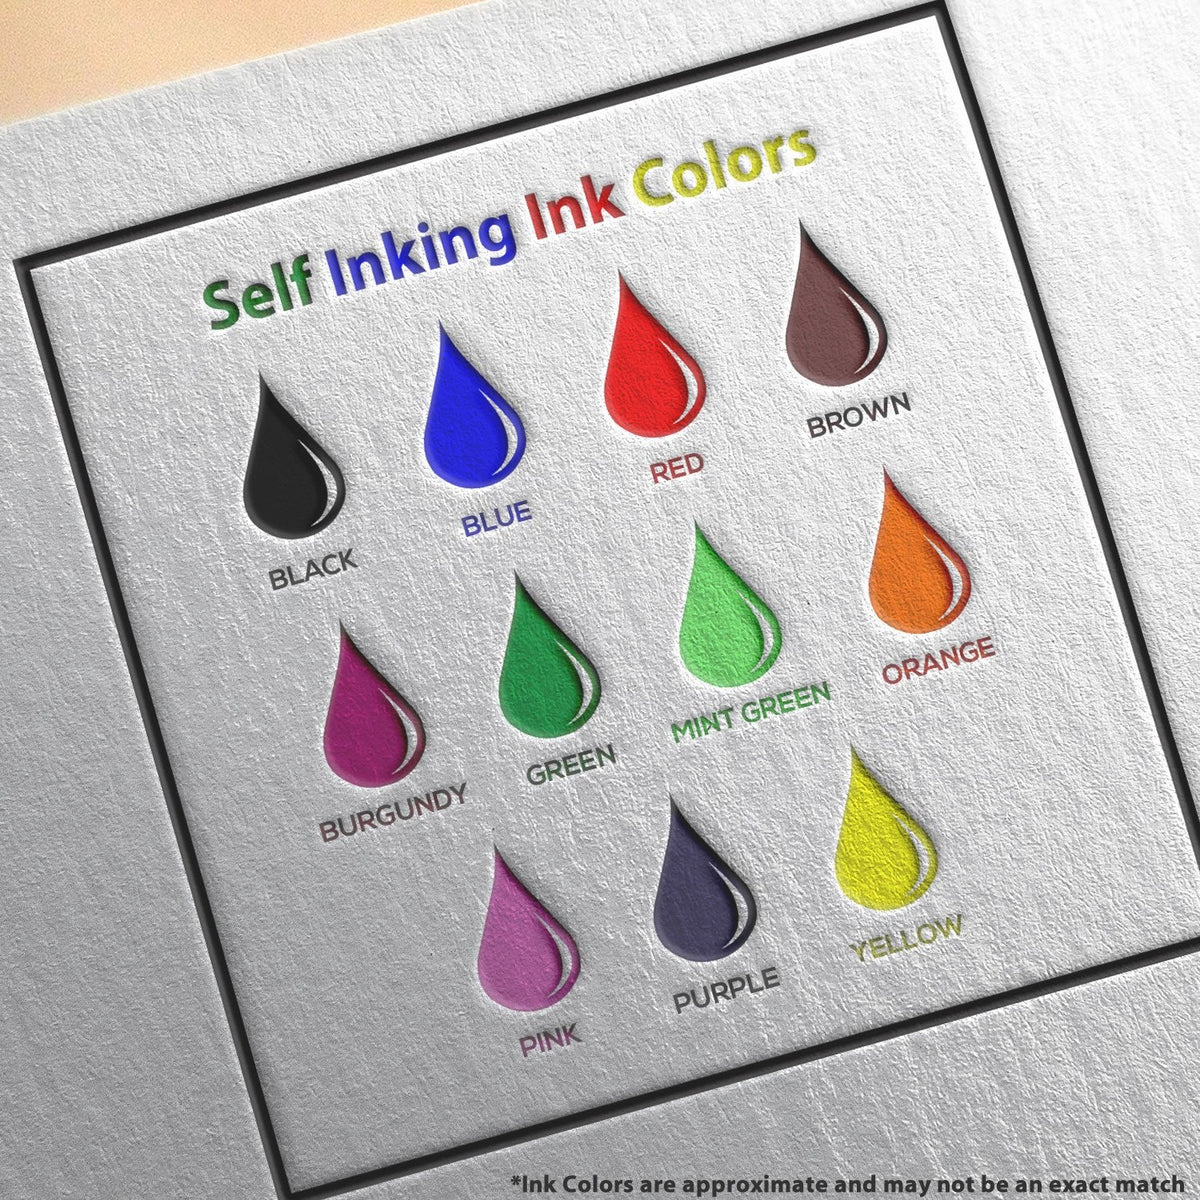 Self-Inking Letter Post Economy Stamp Ink Color Options